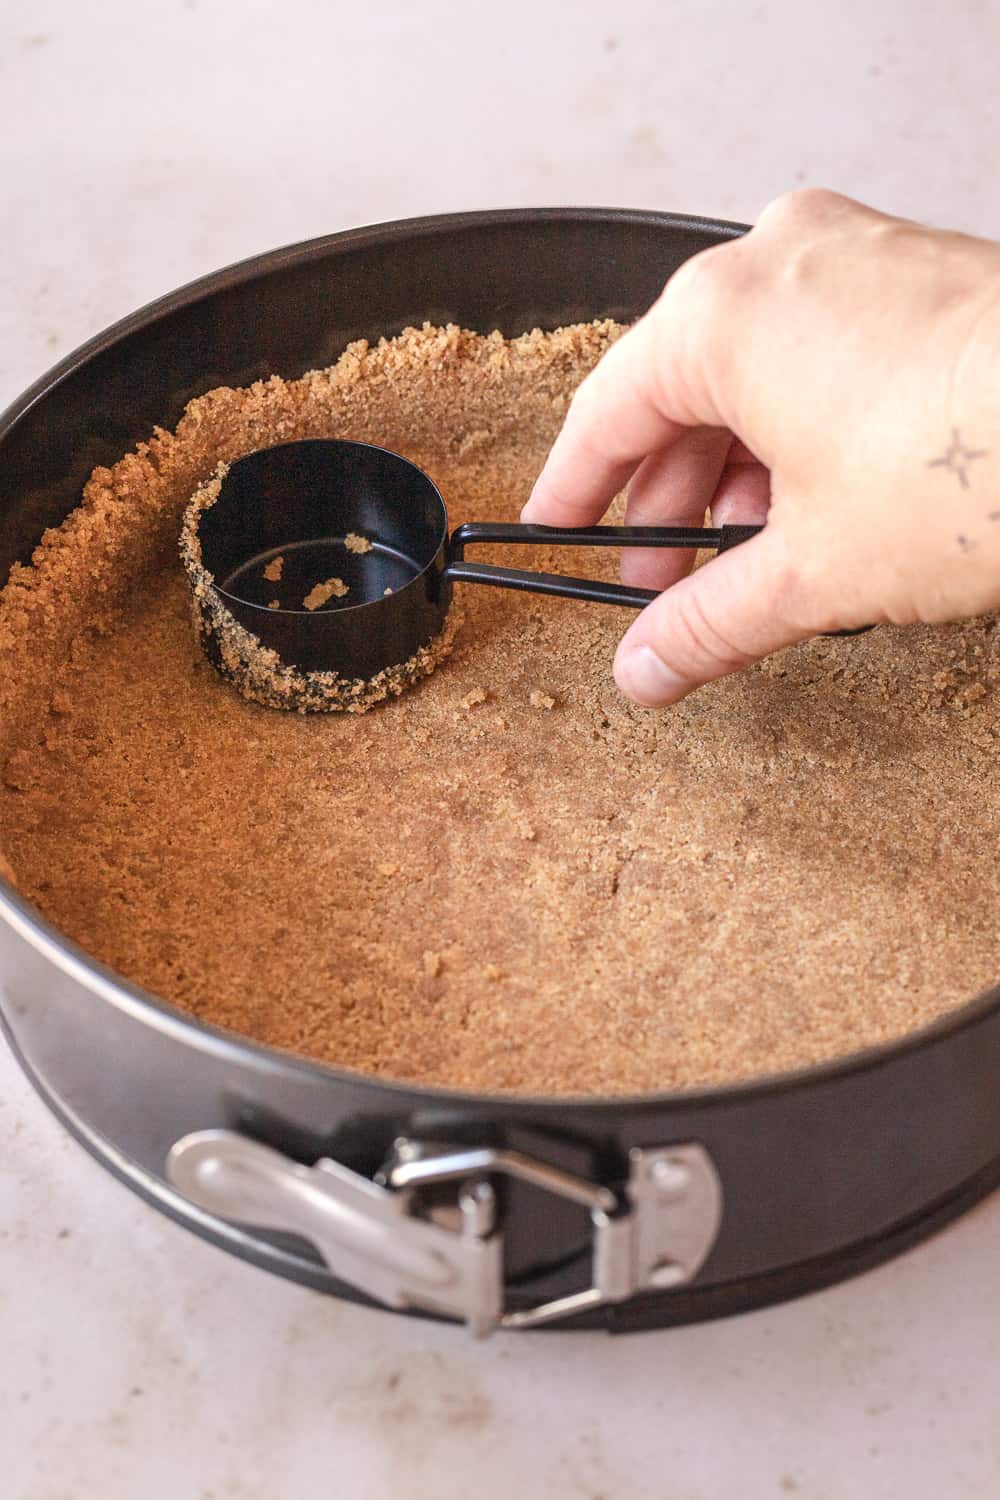 graham cracker crust in the springform pan with a measuring cup pushing the crust up the sides of the pan